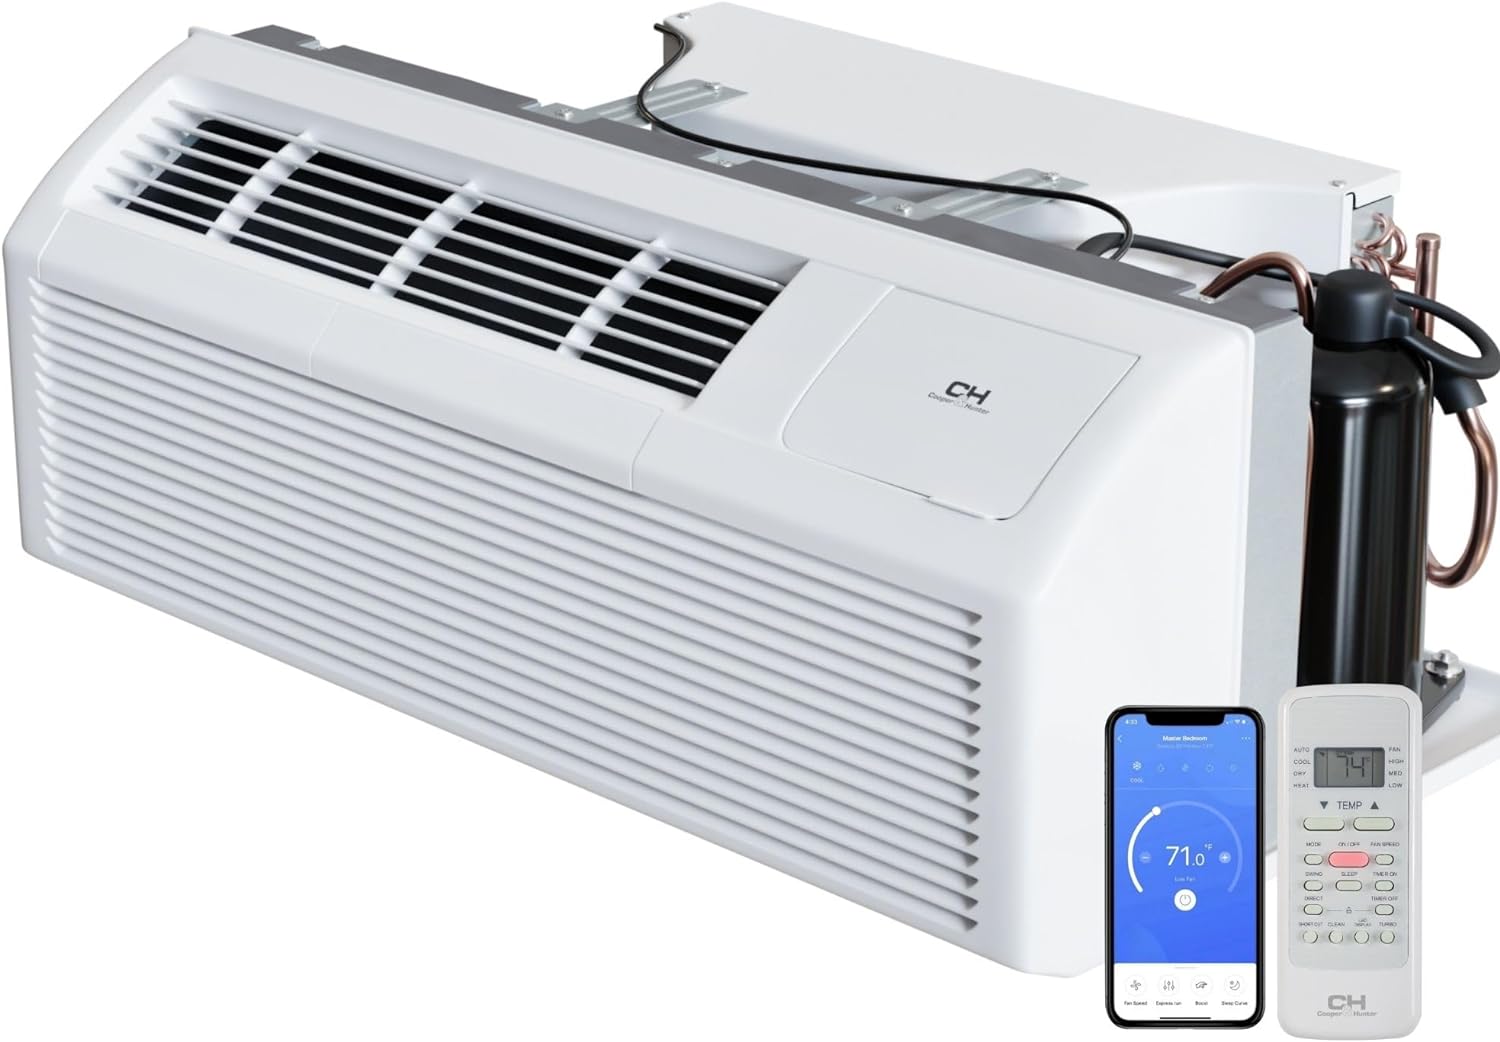 Cooper&Hunter 12,000 BTU PTAC Packaged Terminal Air Conditioner with Heat Pump (R32 Refrigerant) and 3.5 kW Electric Heater Including Wireless Smart Kit, Remote Controller, and a Power Cord